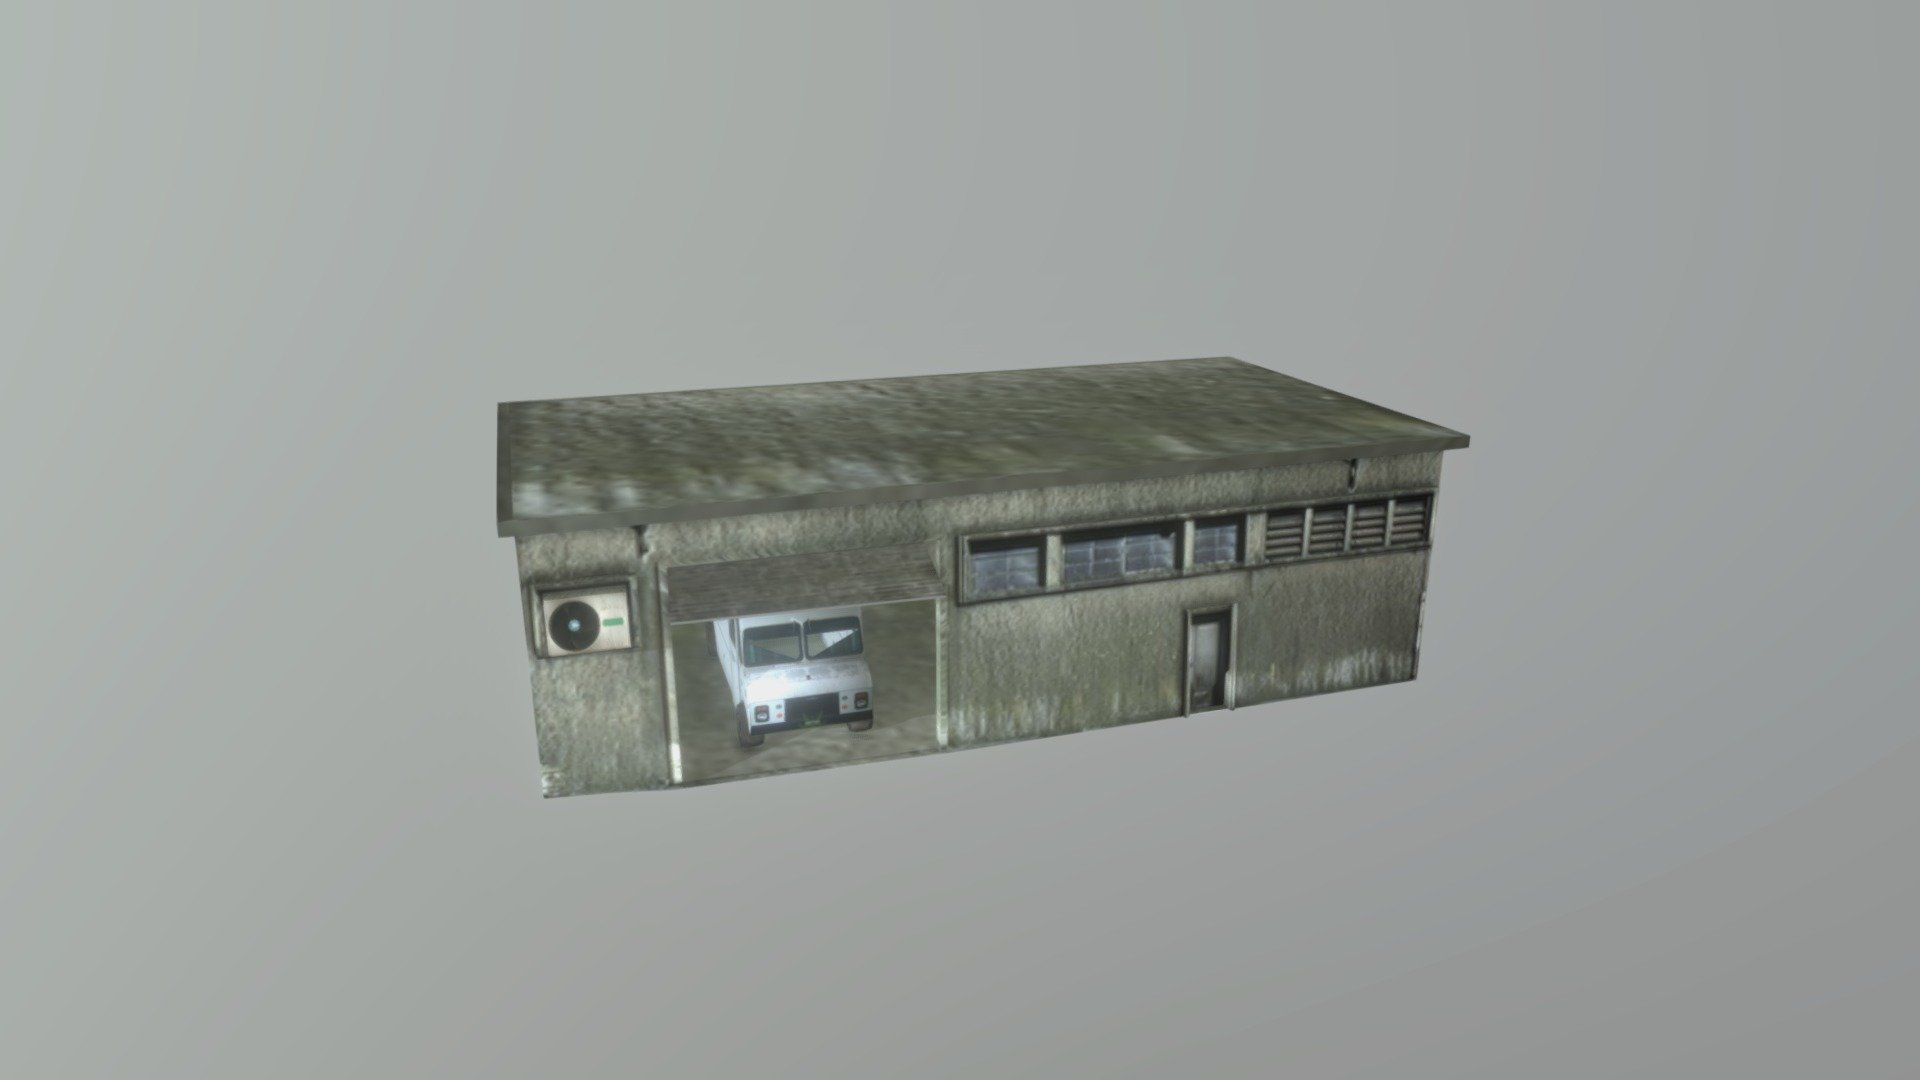 First Start to my Urban Wasteland Pack all buildings will be animated
Each building will come with unique props such as the Van for this one
Made in Blender - Decayed Garage Urban Wasteland Van Building - 3D model by BehrtronStudios 3d model